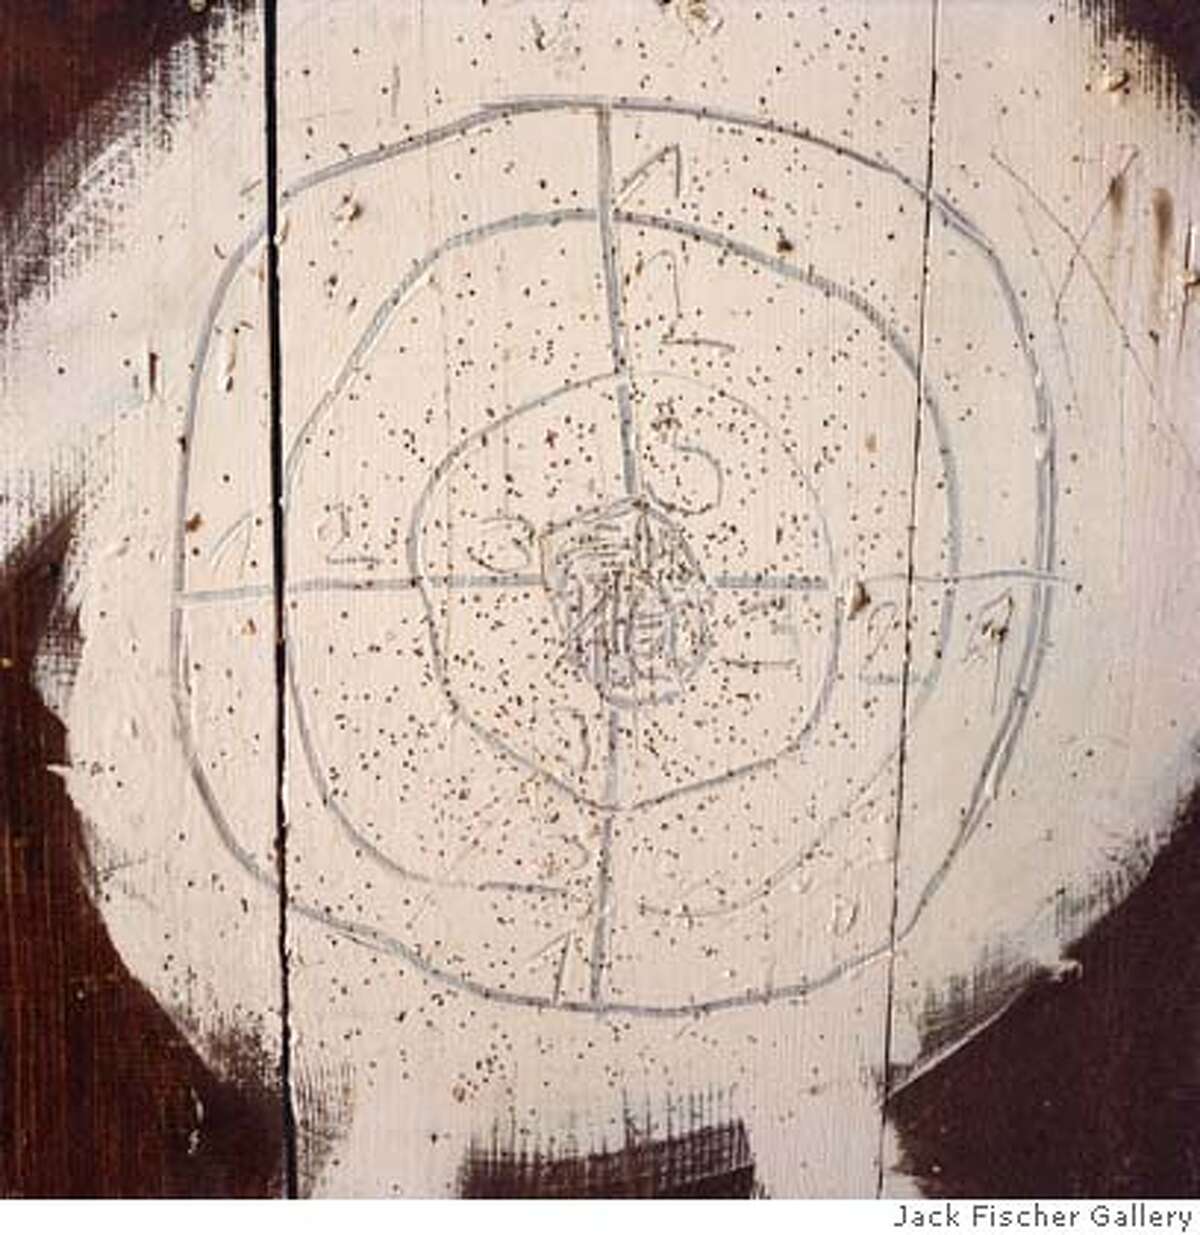 ###Live Caption:" The Handmade Target" (2008) Lightjet C-print by Airyka Rockefeller 22x22 in.###Caption History:" The Handmade Target" (2008) Lightjet C-print by Airyka Rockefeller 22x22 in.###Notes:###Special Instructions: